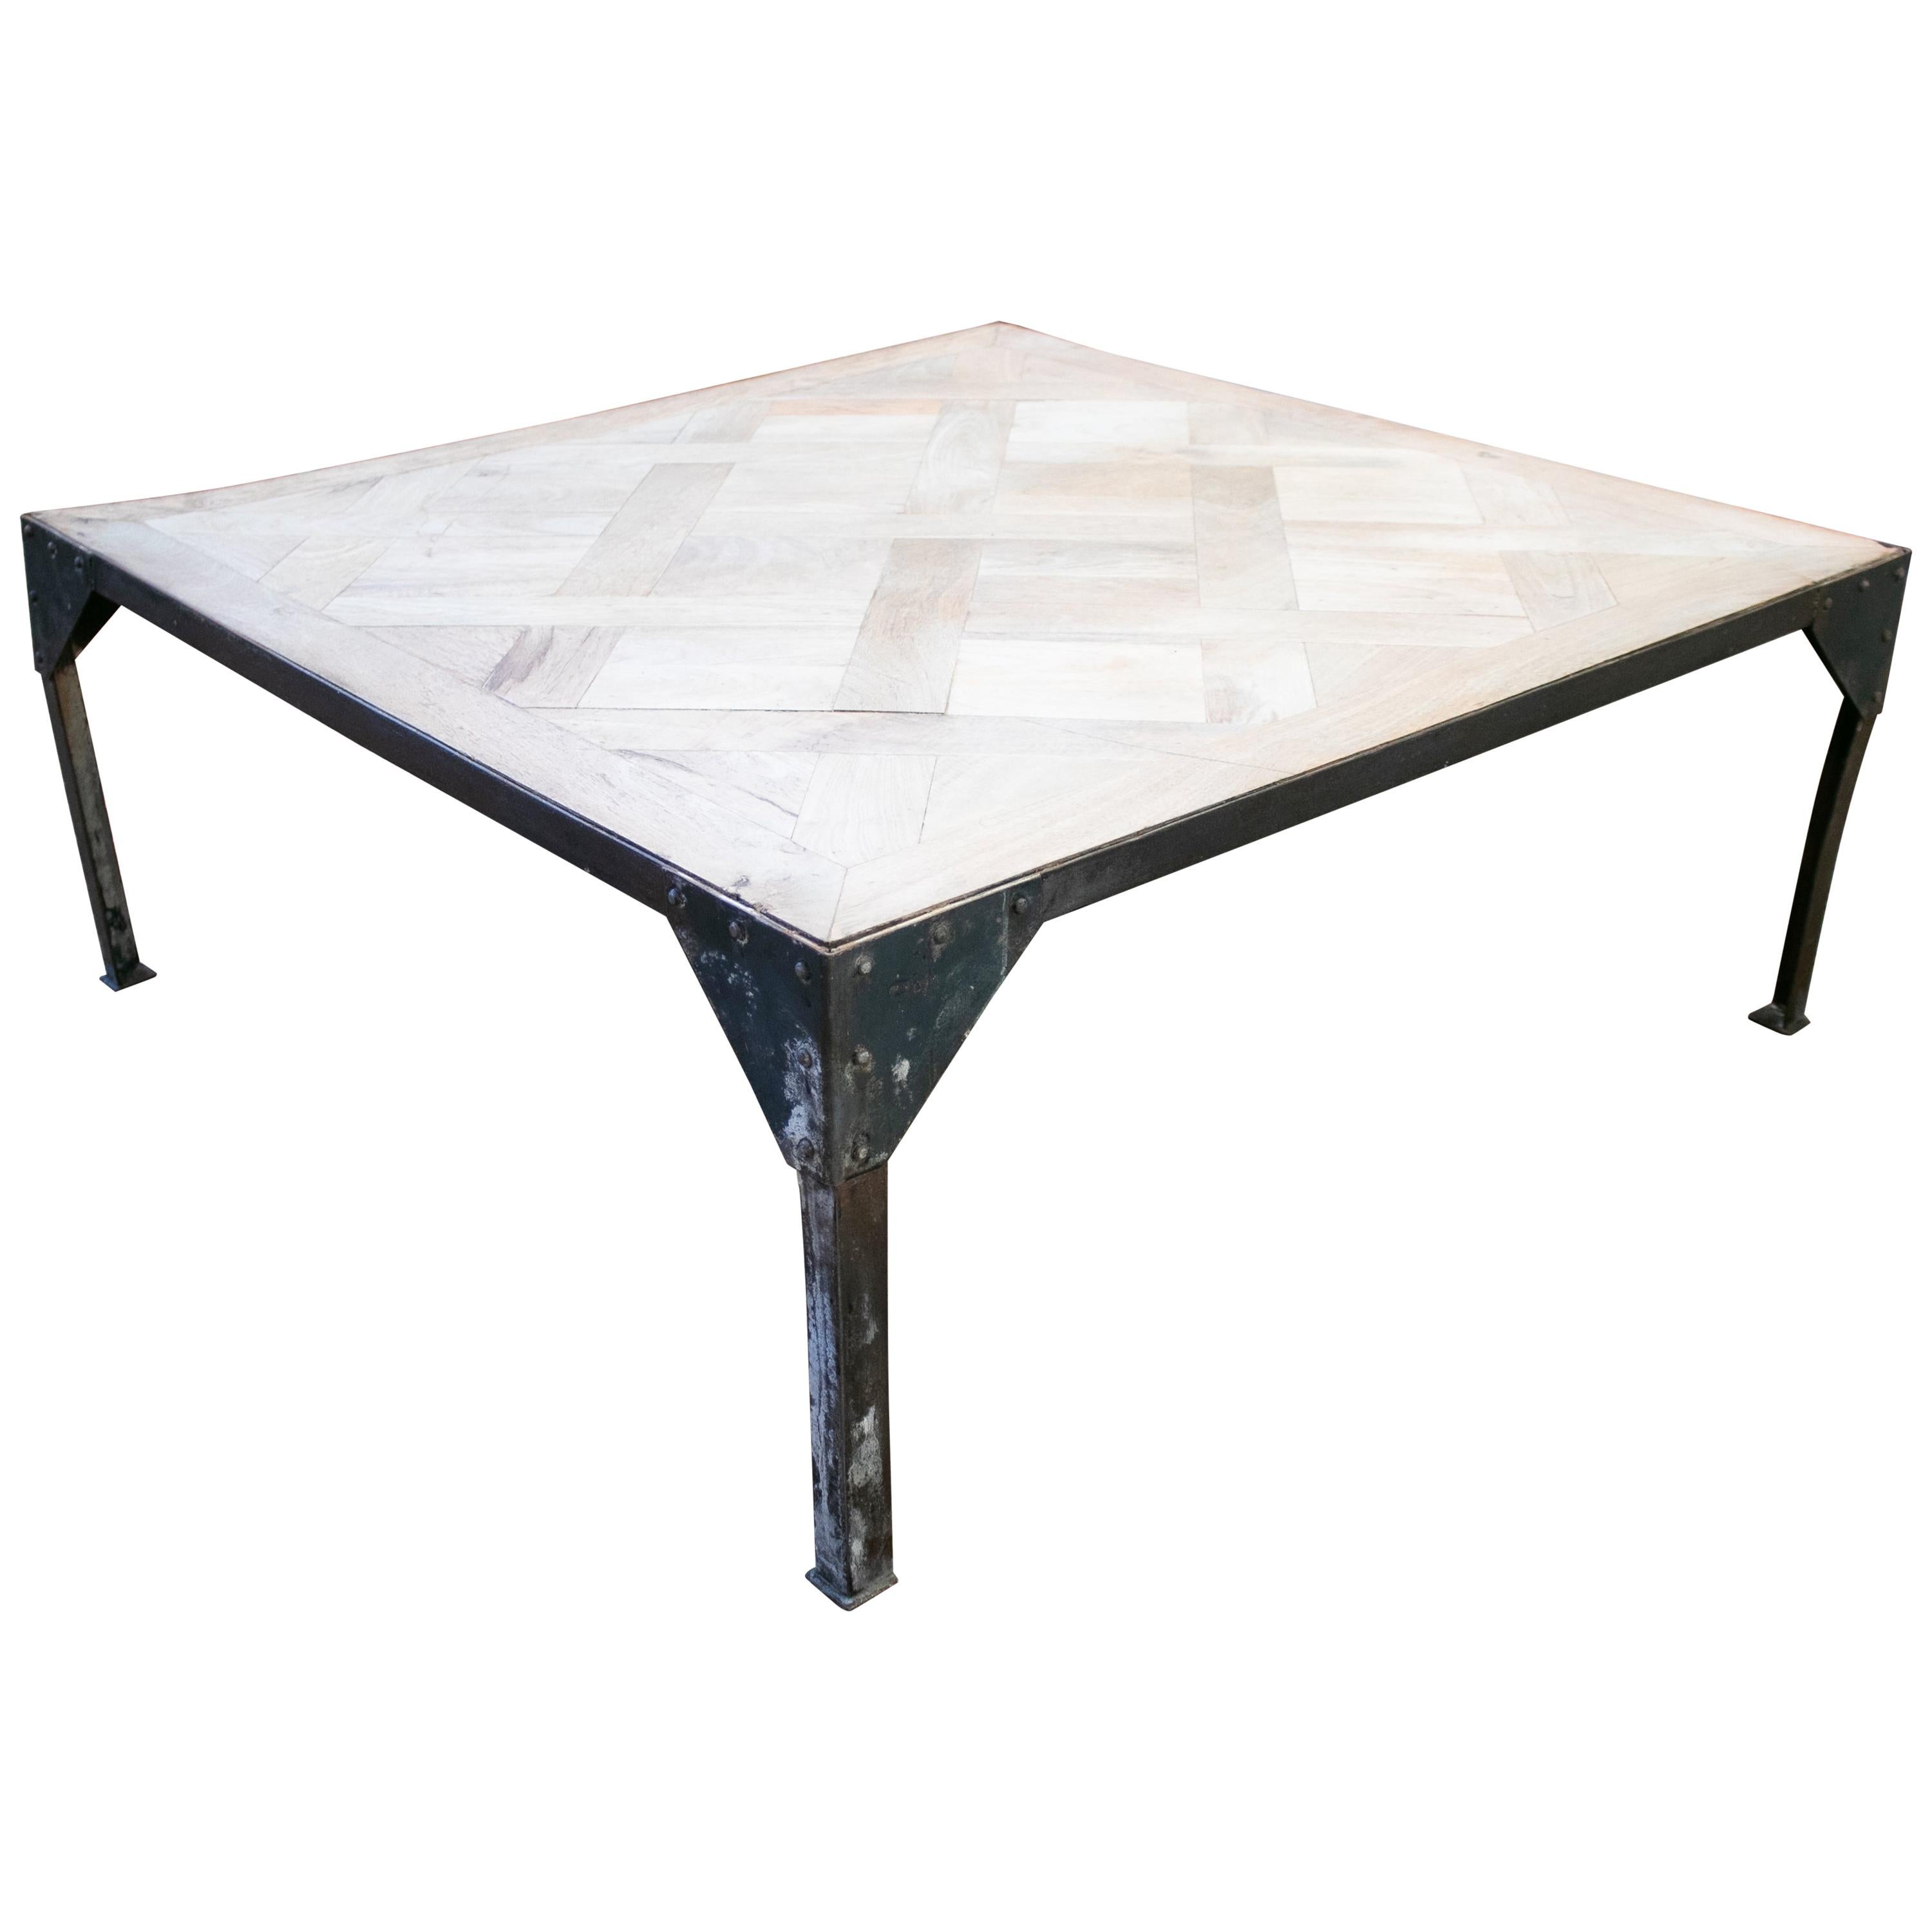 1980s French Wood Top on Rectangular Iron Base Industrial Styled Coffee Table